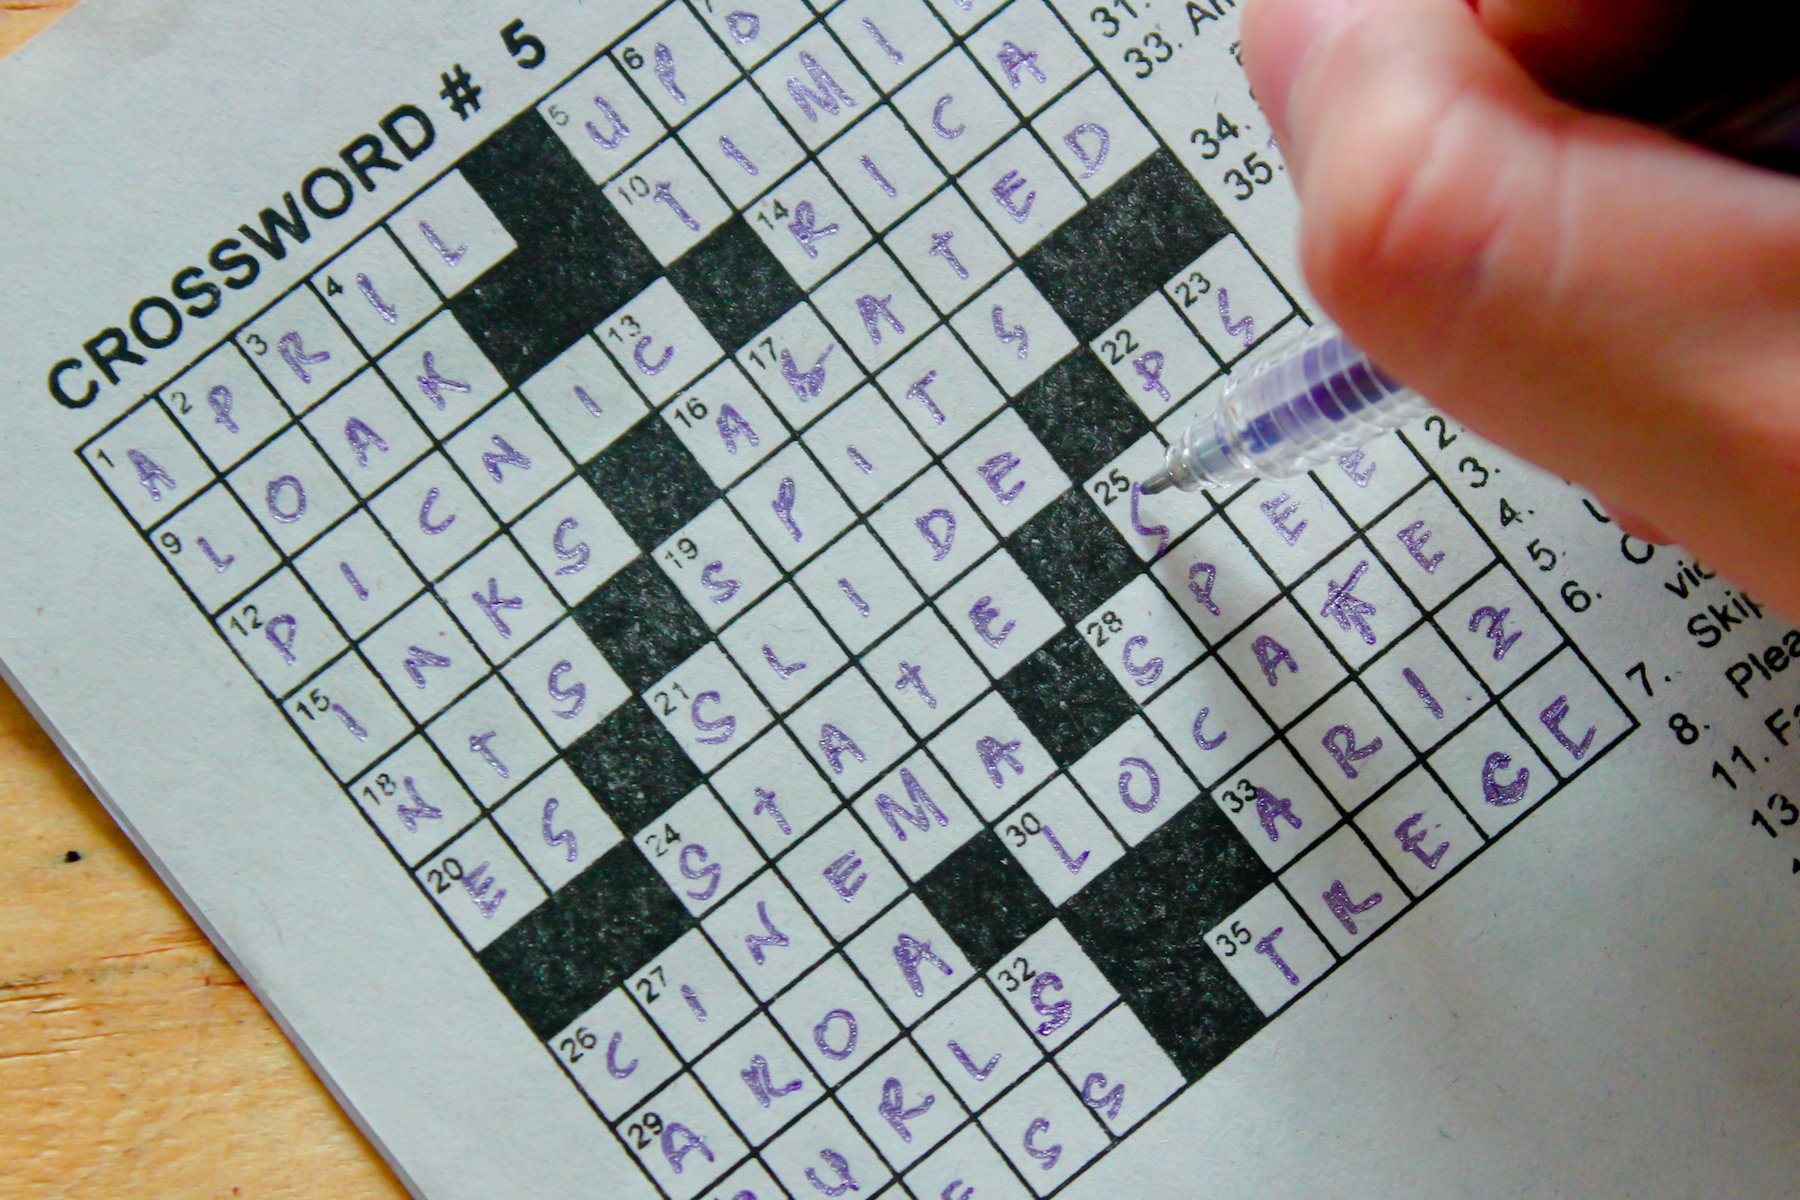 Tracing American Culture and Language Through NYT Crossword Puzzles